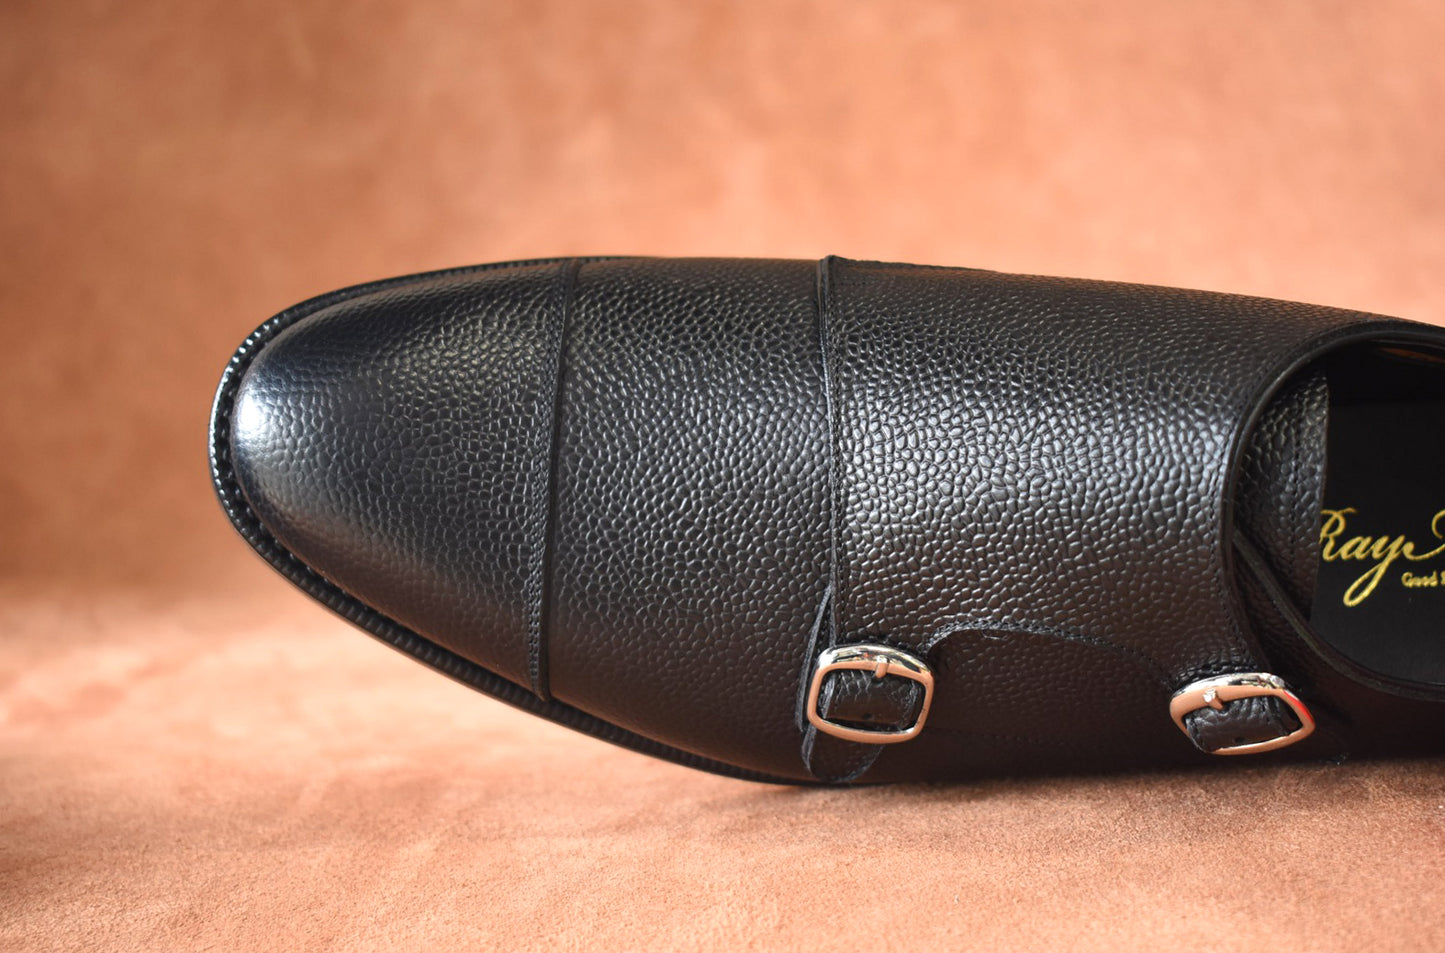 “Talia” Double Monk Strap, Black Dress Shoes, Grained Leather, Goodyear welted, US size 5 1/2 ~ 10